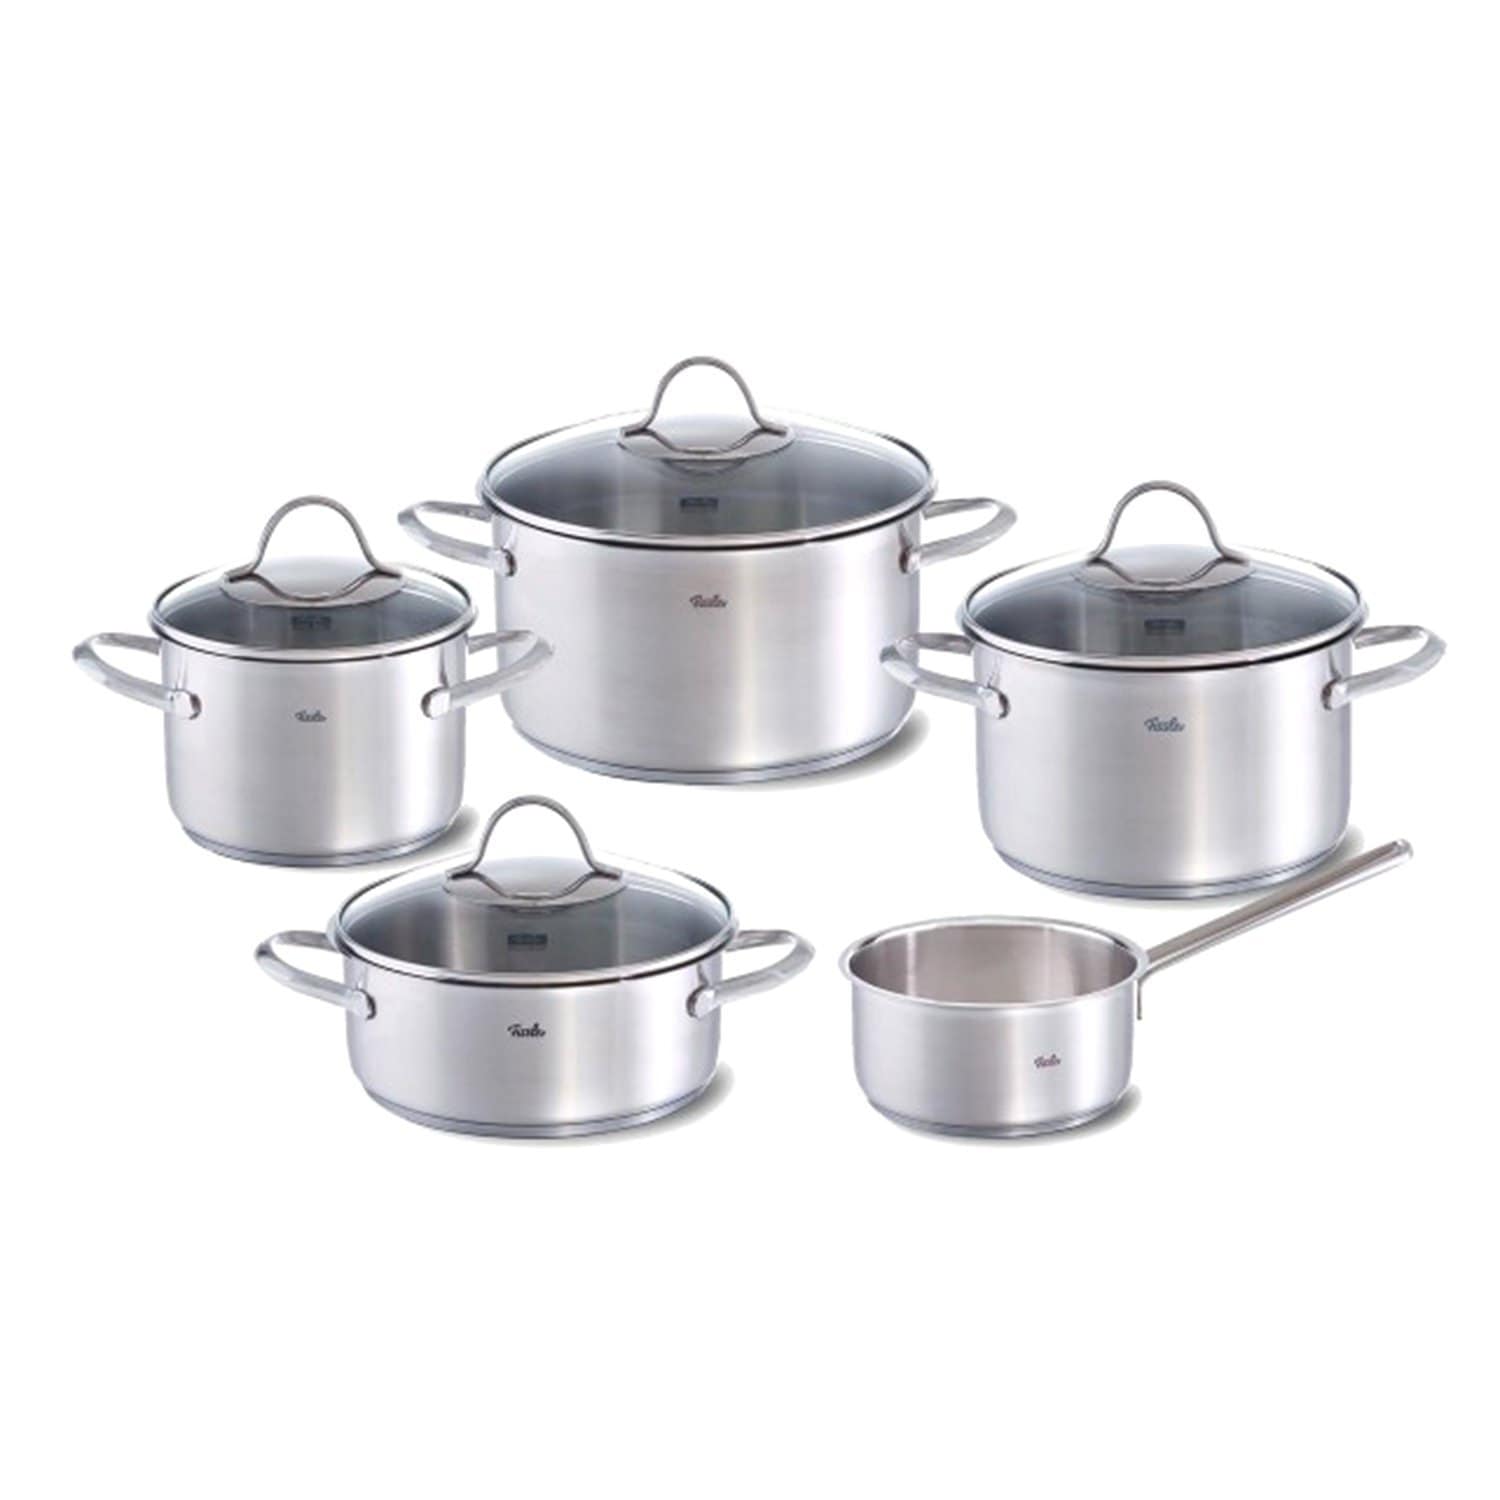 Fissler 9 Piece Cookware Set - Silver and Clear - 002-114-05-000/0 - Jashanmal Home